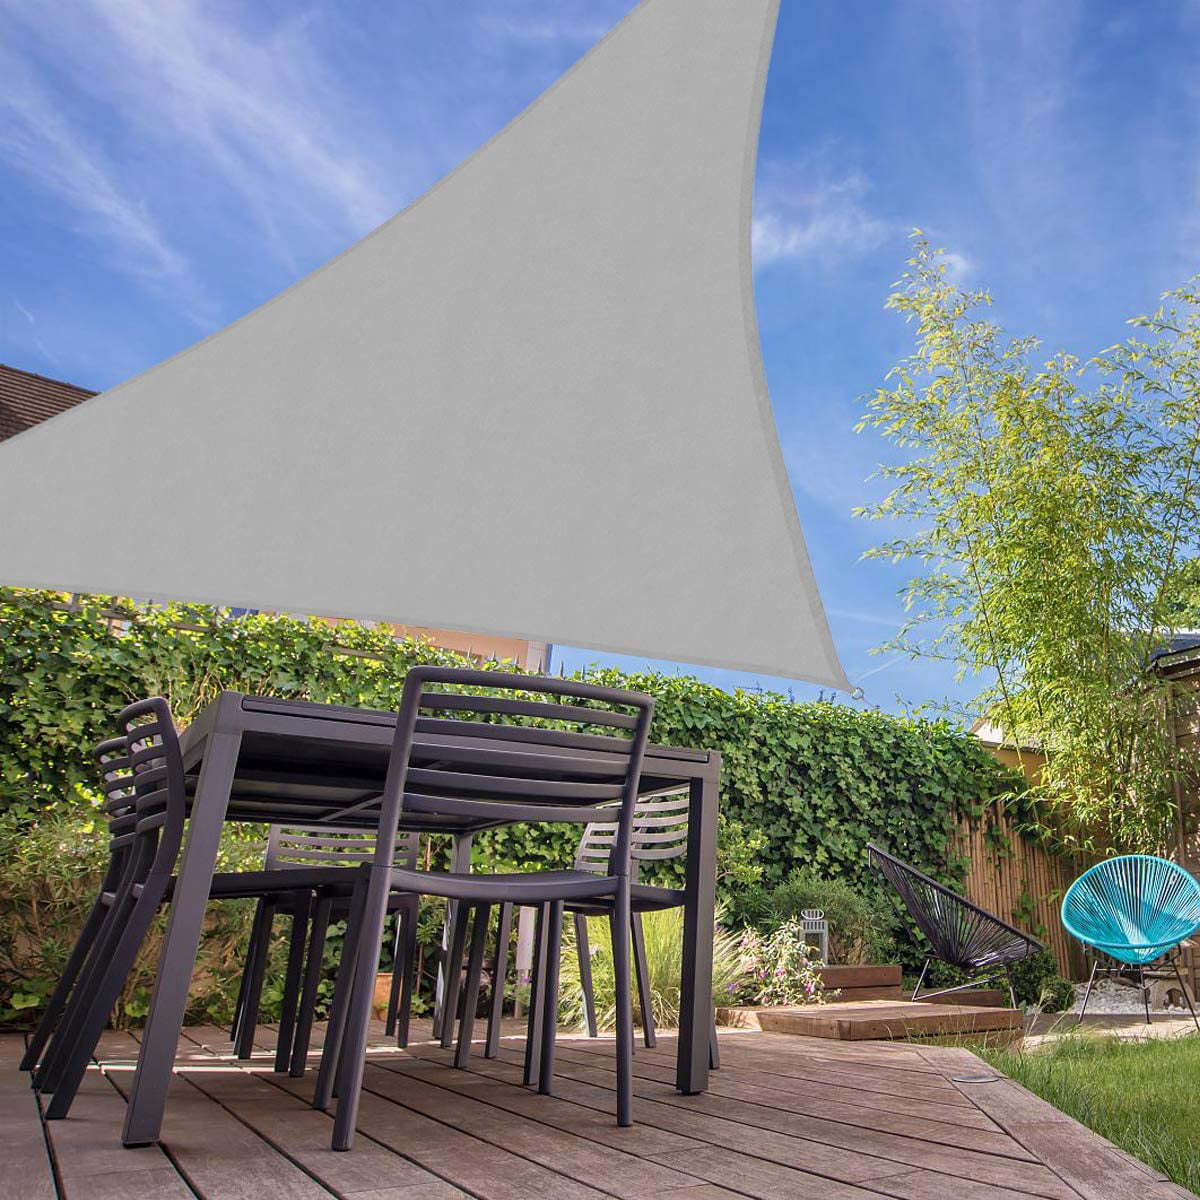 Details about   Awnings Waterproof Sun Shade Sail Patio Pool Top Cover Pole Canopy Outdoor Beach 